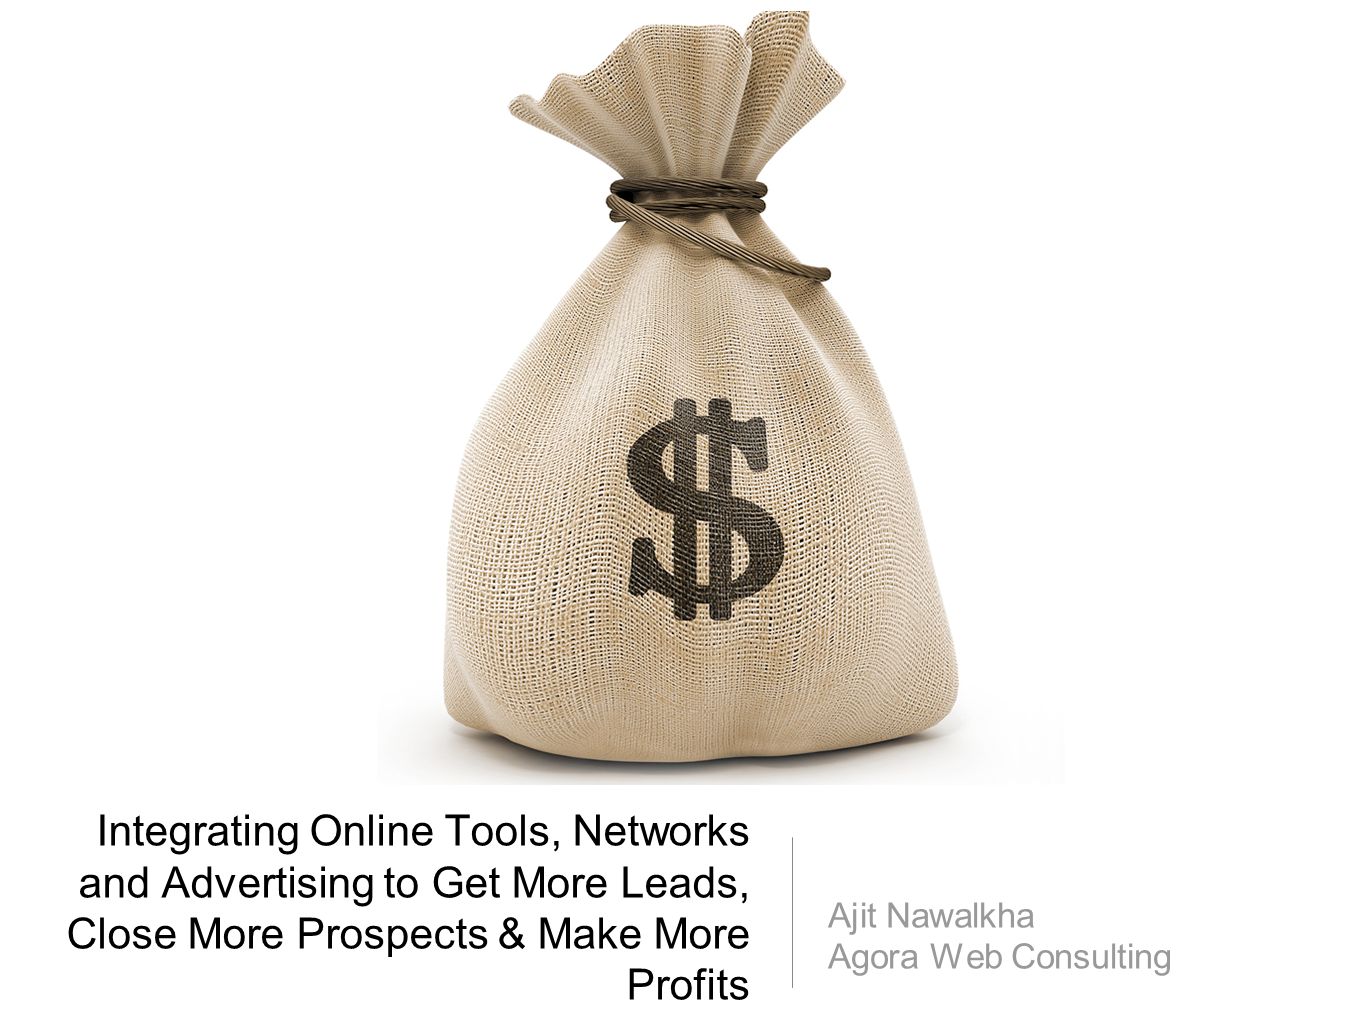 Integrating Online Tools, Networks and Advertising to Get More Leads, Close More Prospects & Make More Profits Ajit Nawalkha Agora Web Consulting